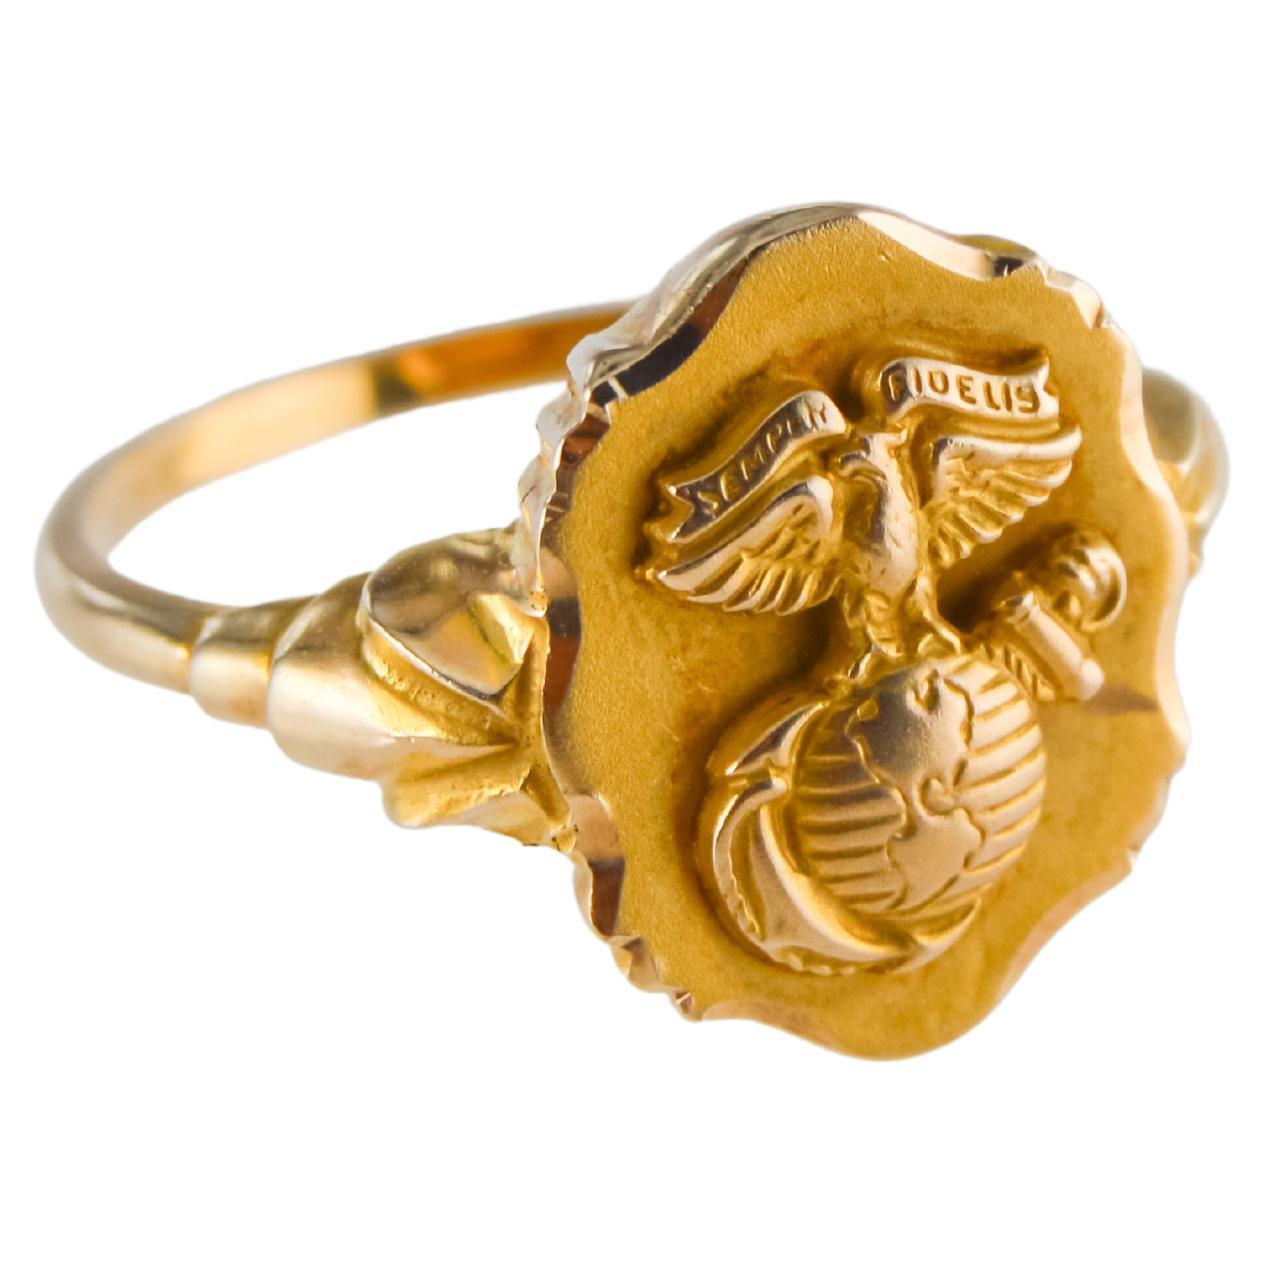 Solid 10Kt. Gold Art Deco Die Struck School Ring Hand Constructed from 1940's For Sale